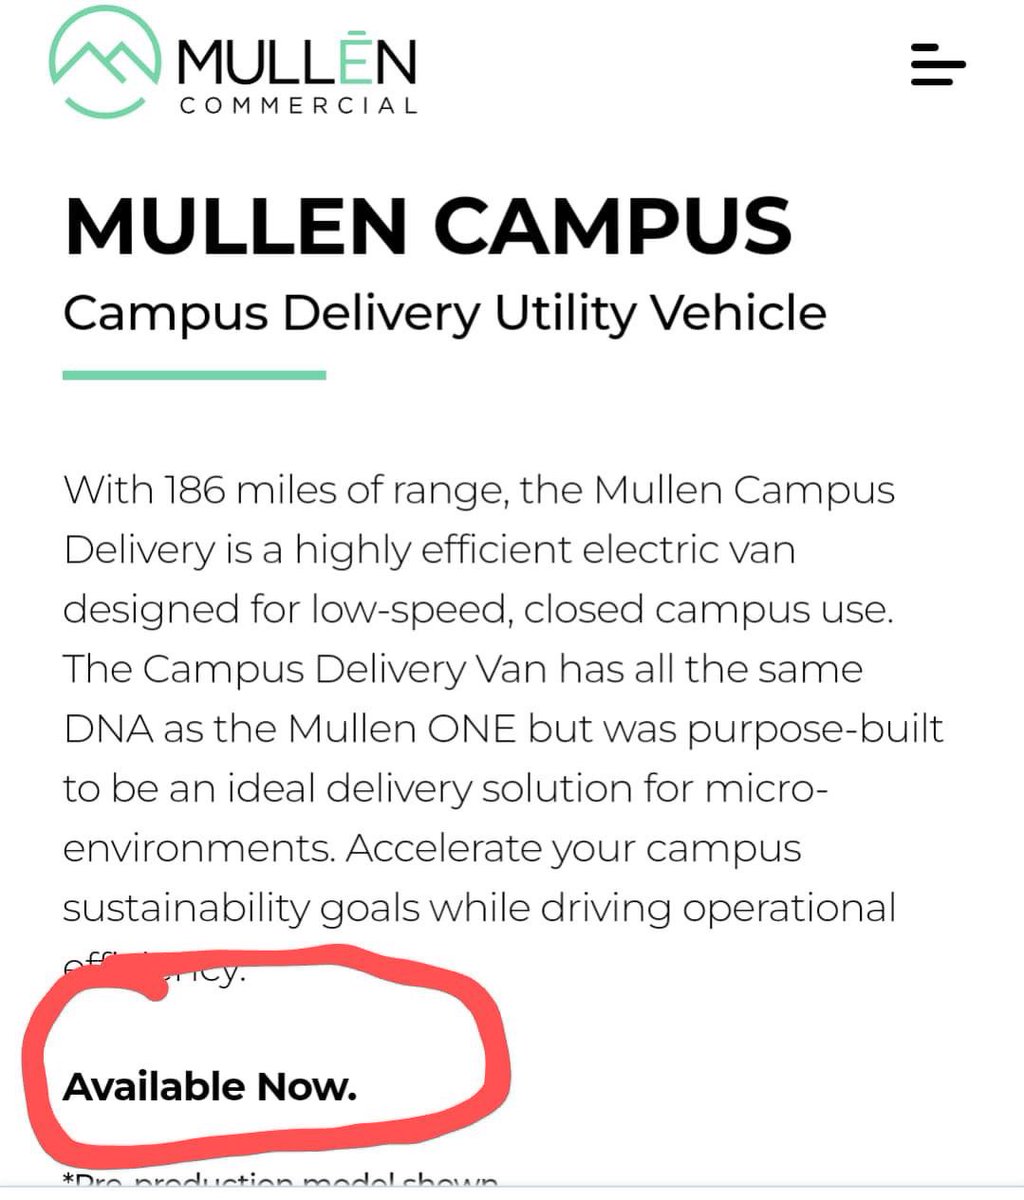 The #MULN Campus
Now available